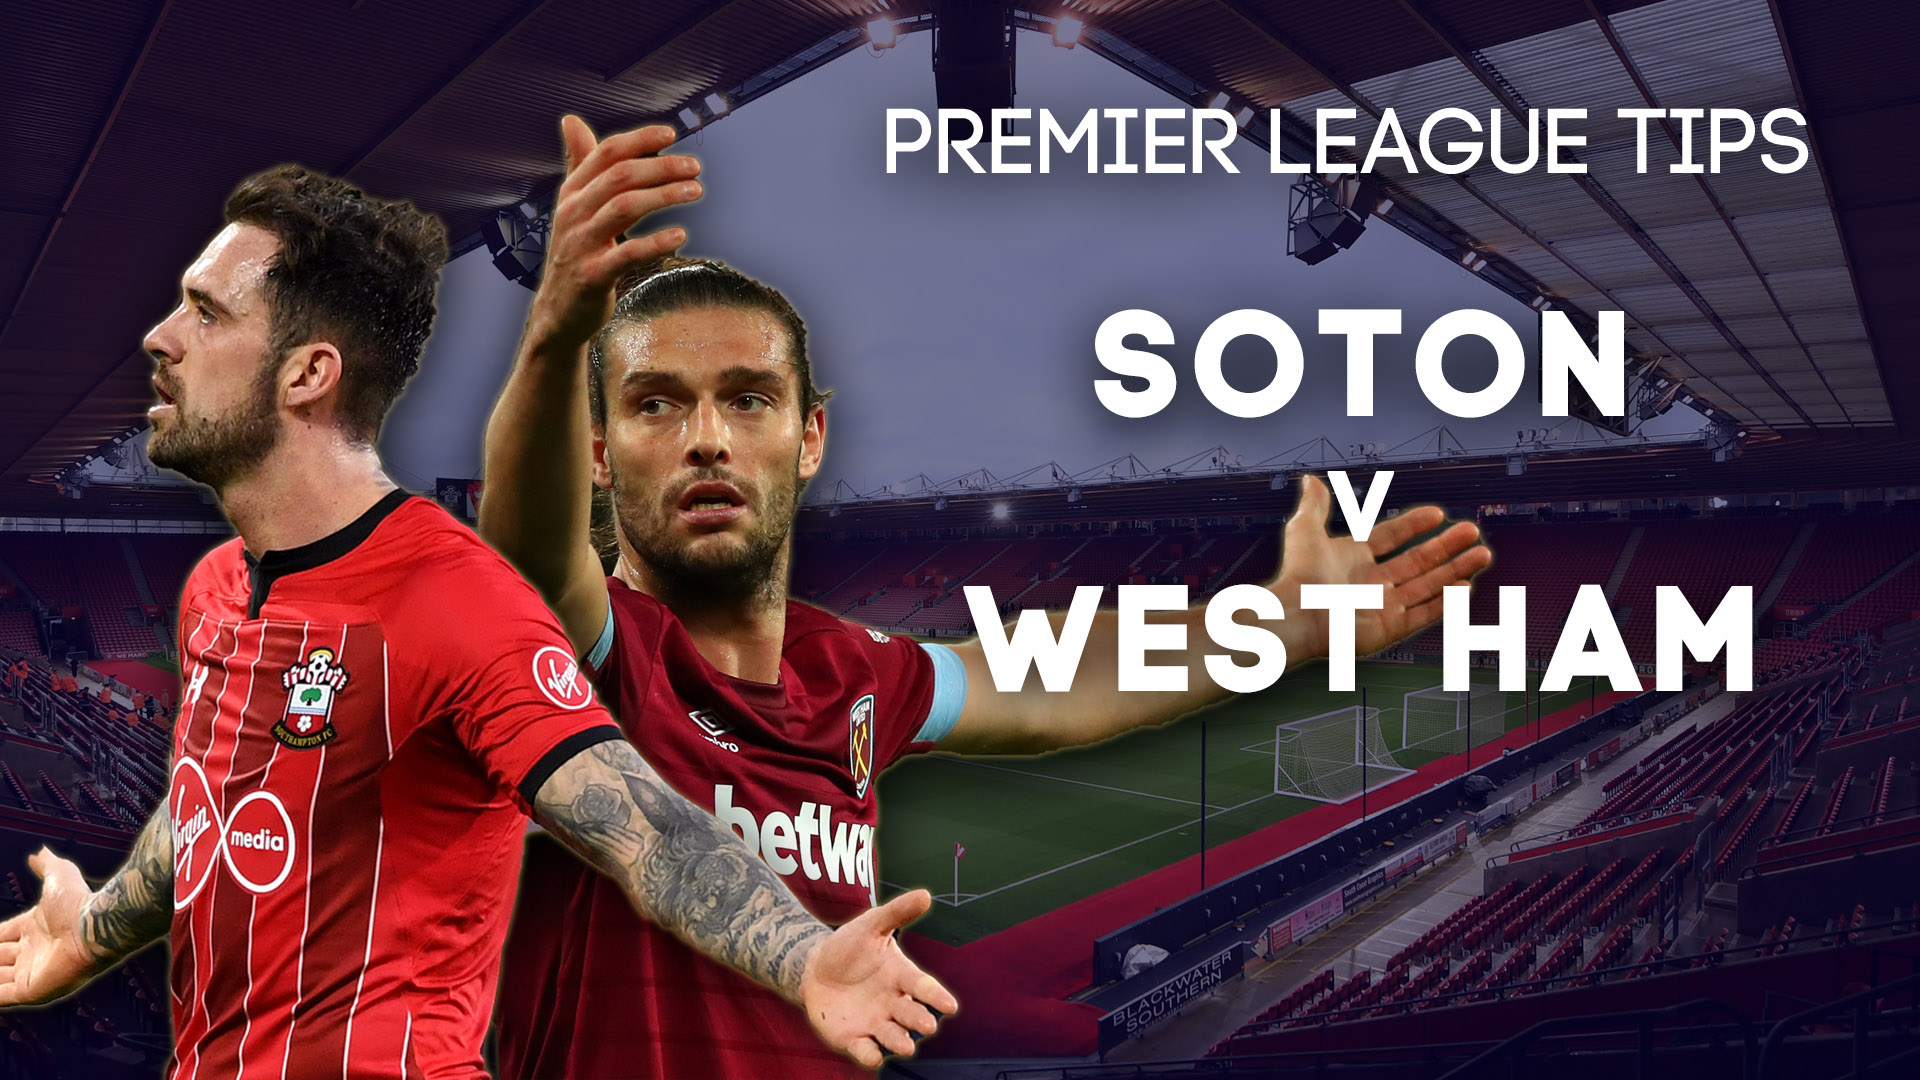 Southampton v West Ham betting Tips, and latest odds for Premier clash